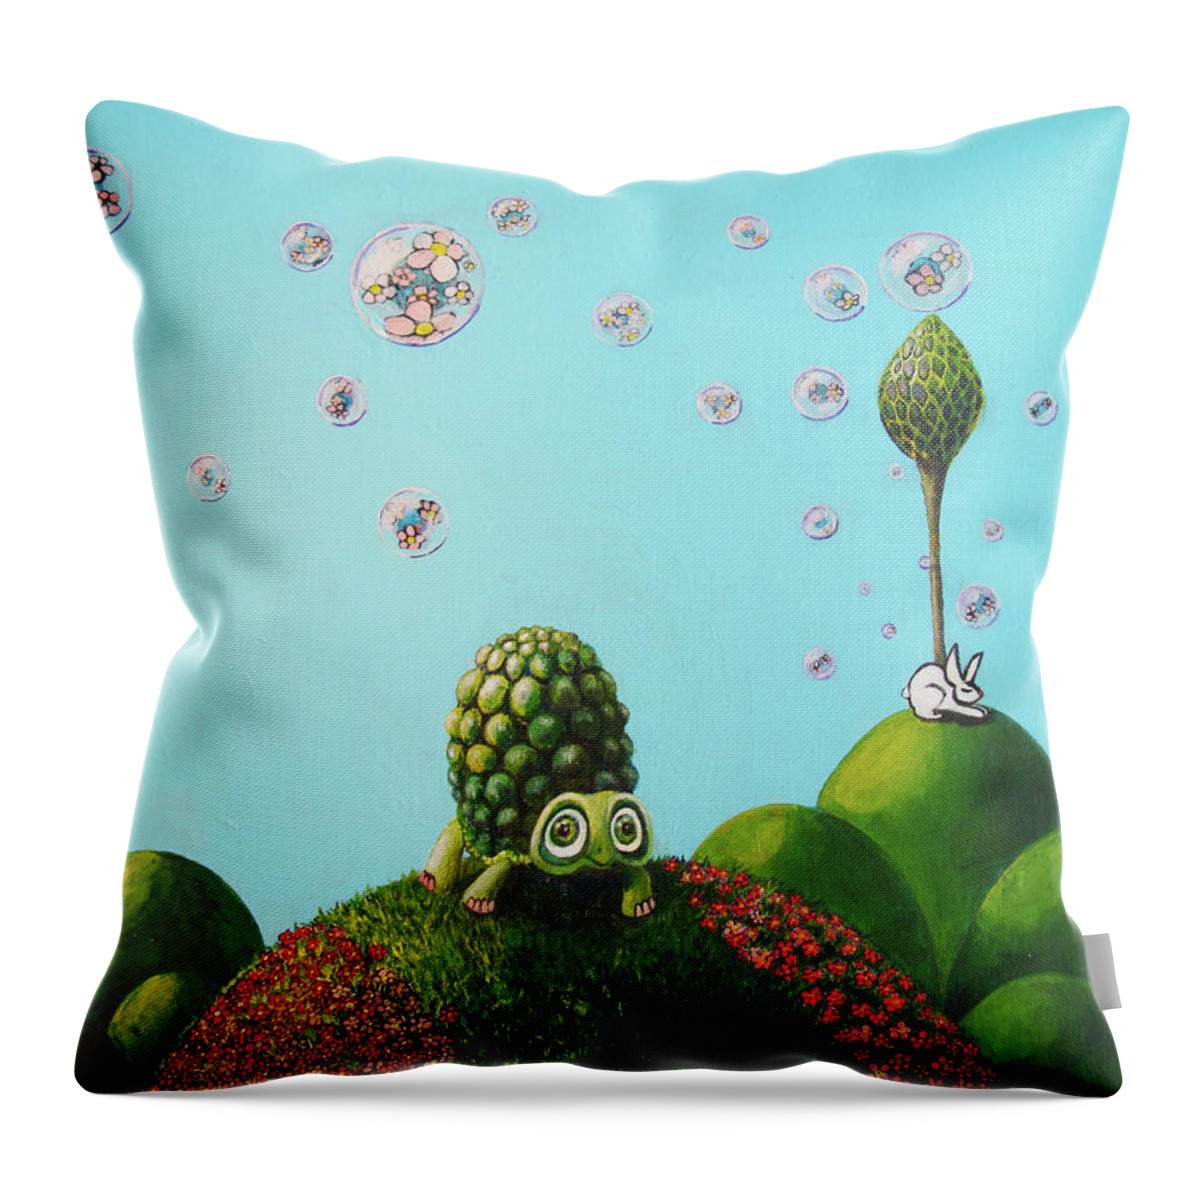 Turtle Throw Pillow featuring the painting Never Give Up by Mindy Huntress